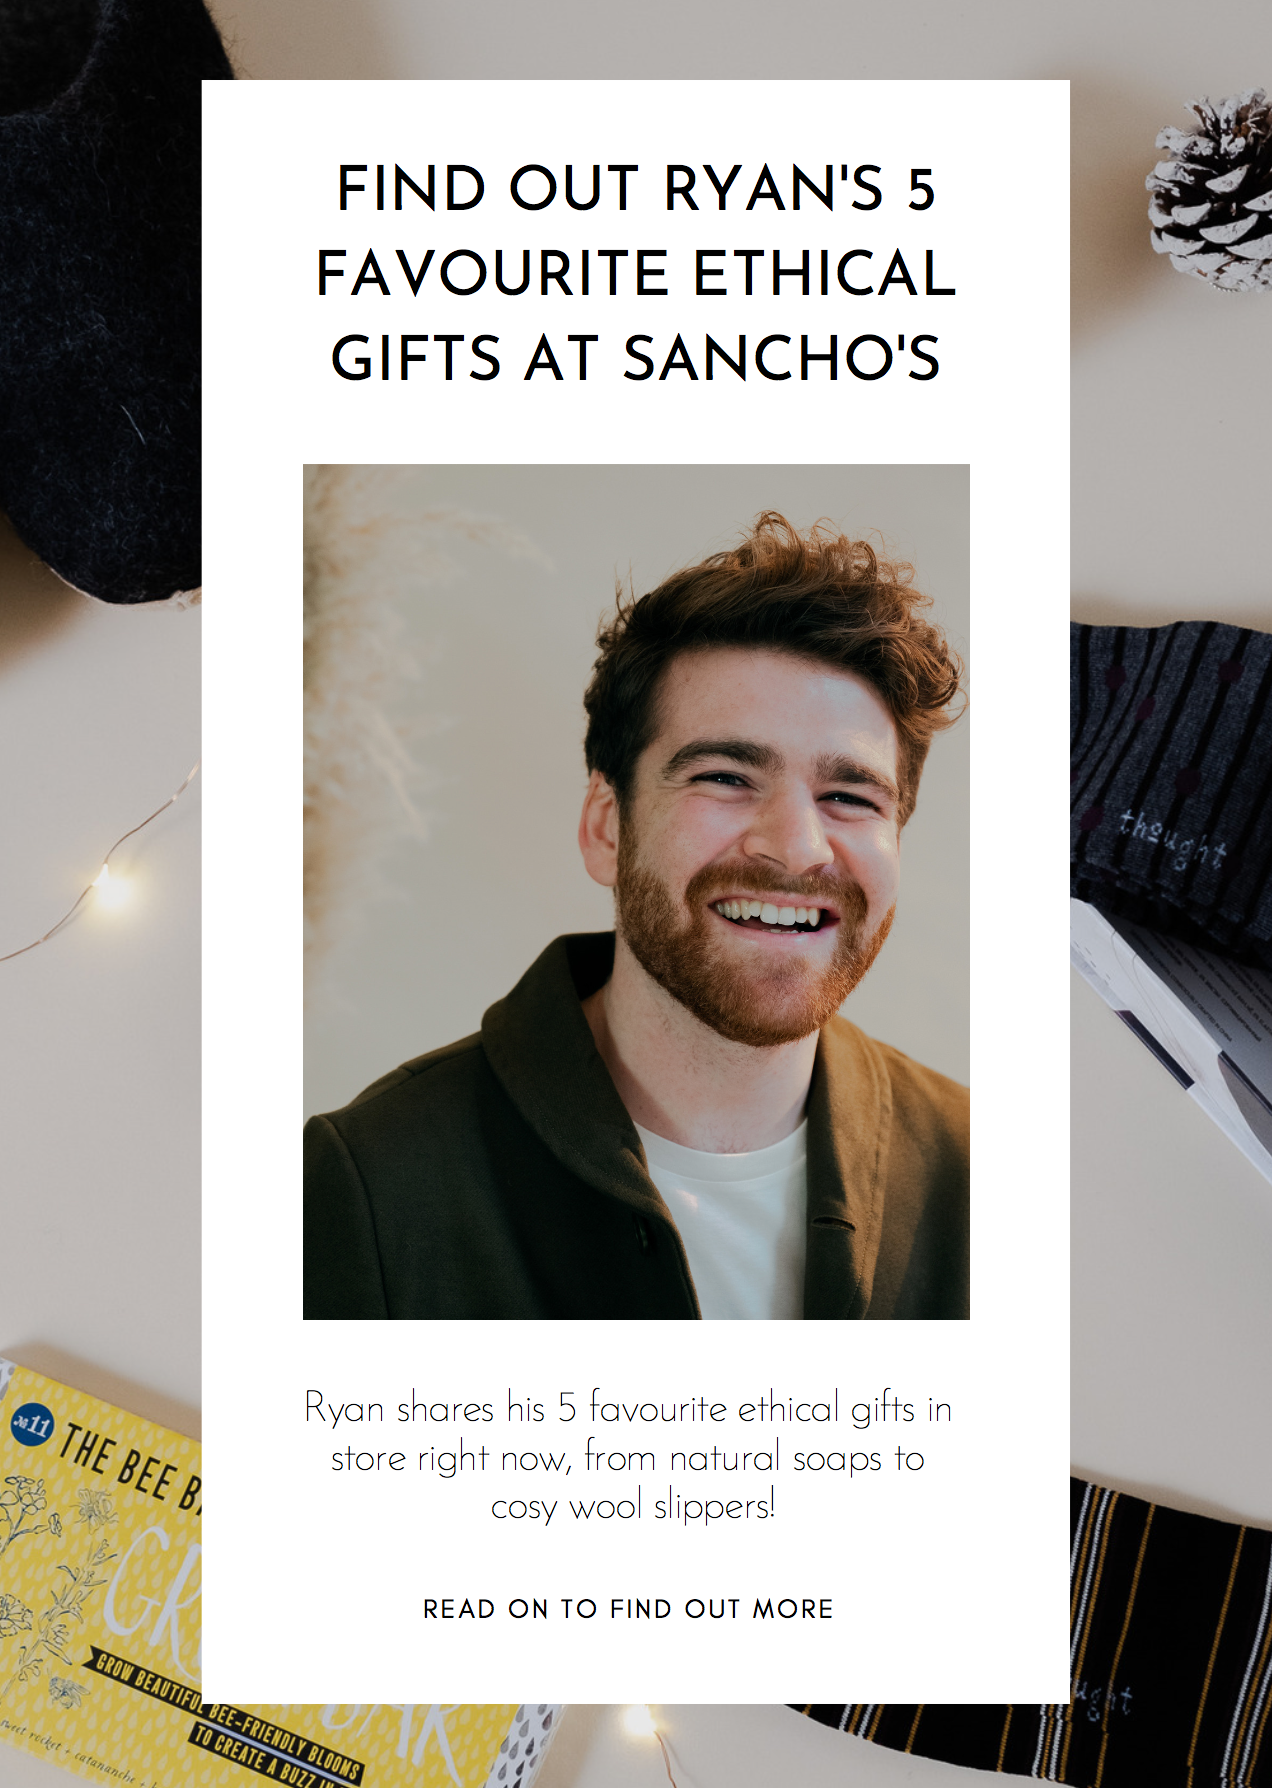 Find out Ryan's 5 favourite ethical gifts